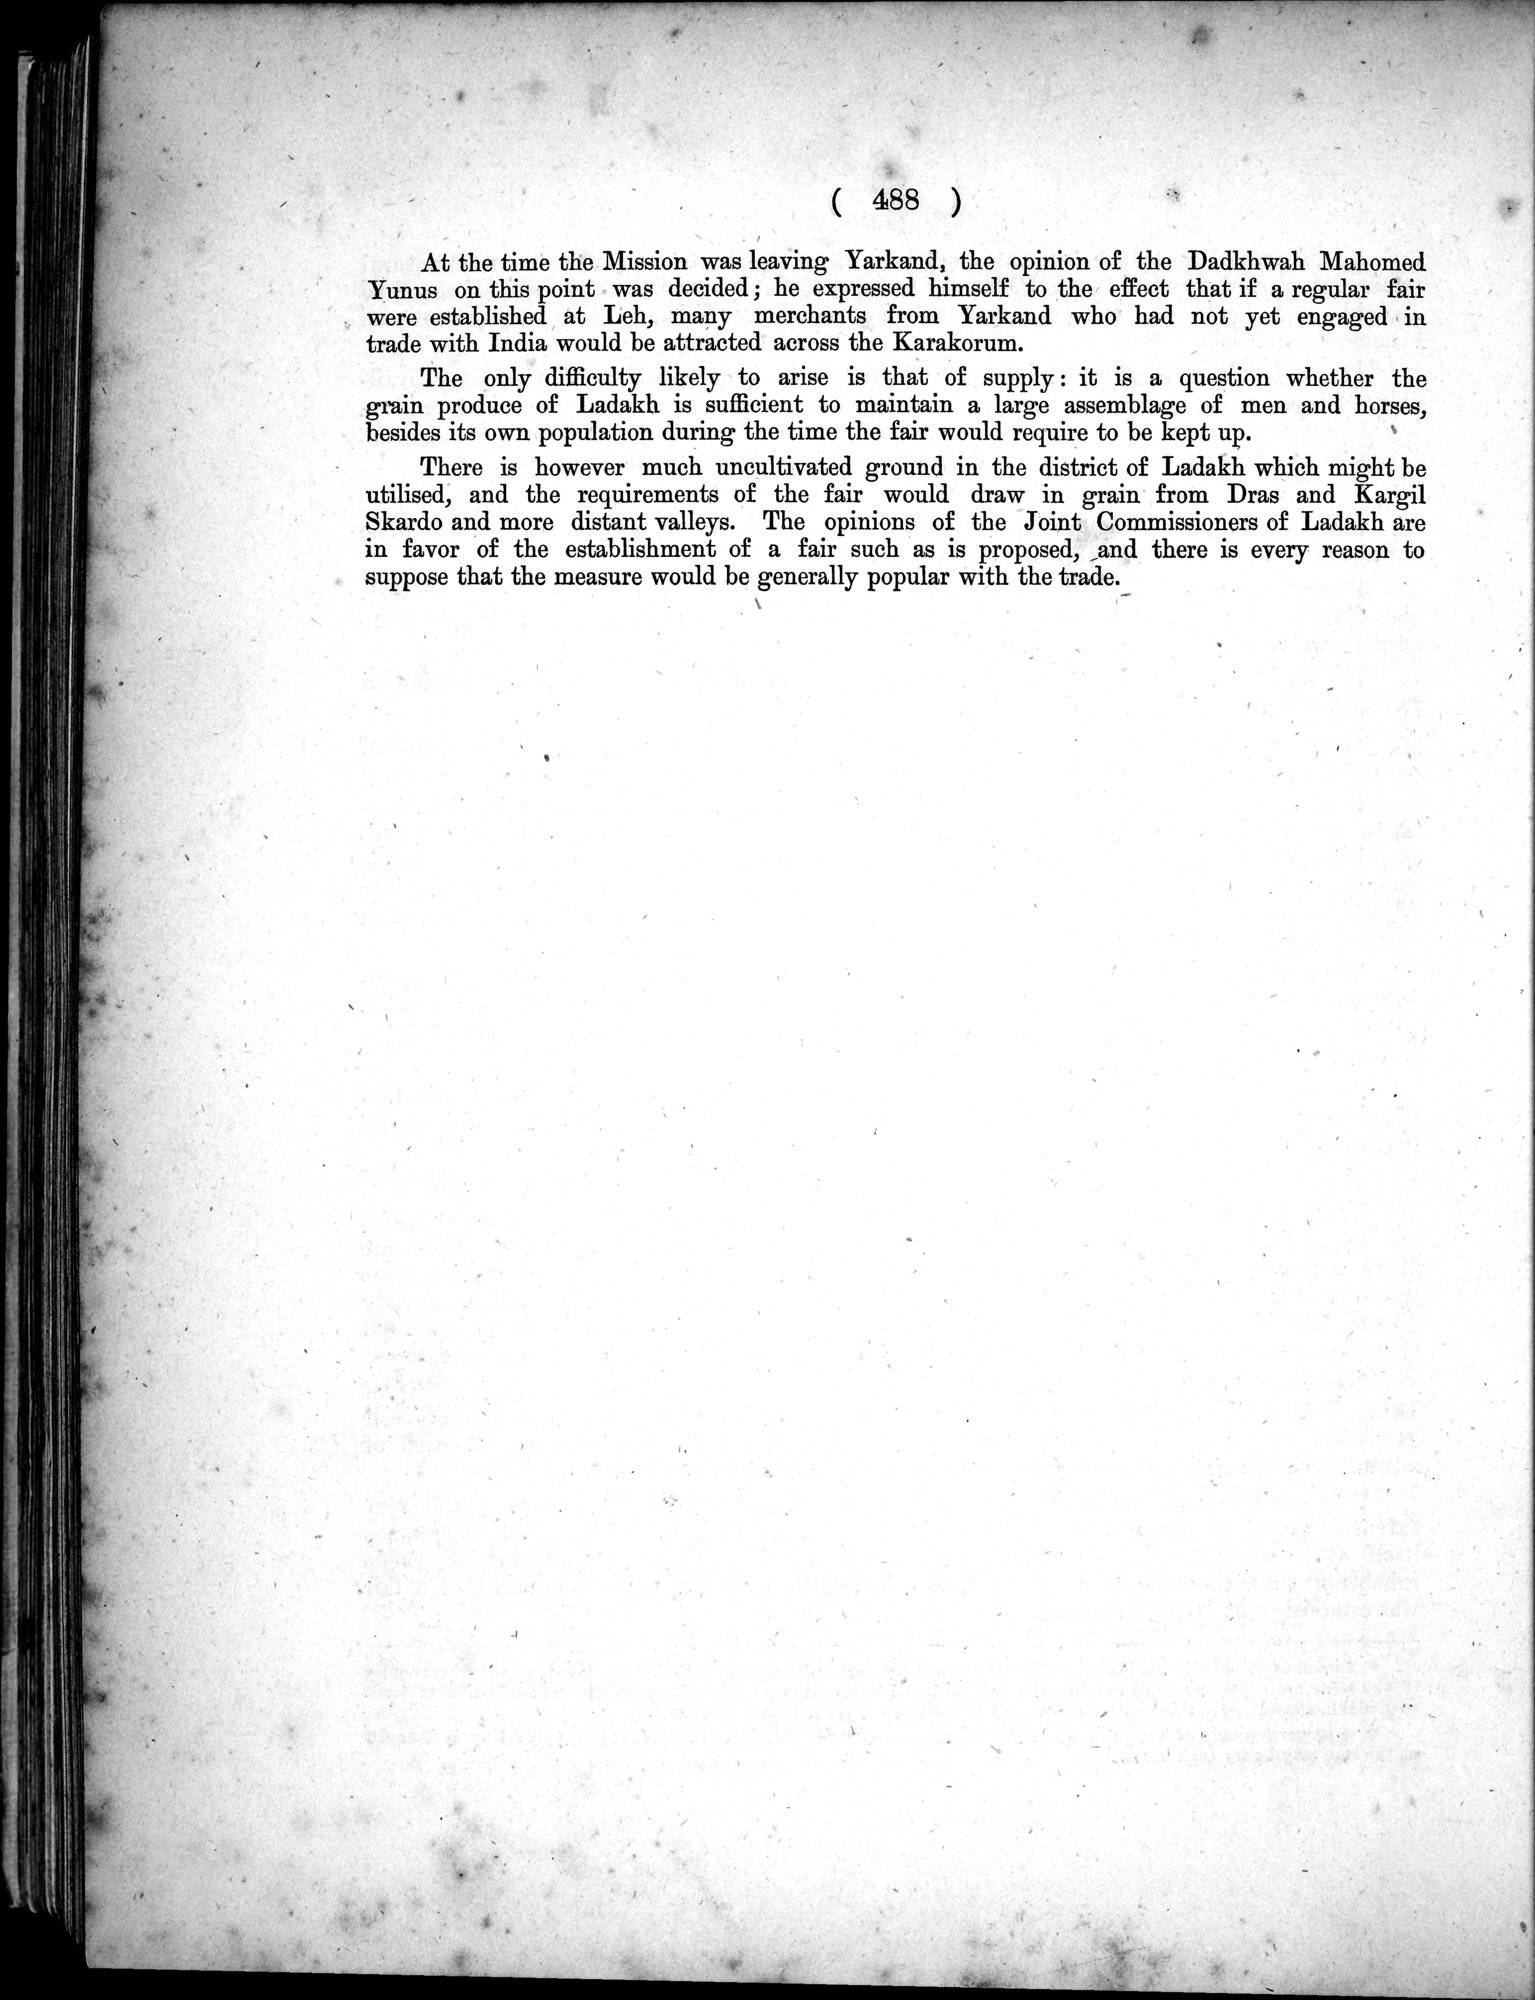 Report of a Mission to Yarkund in 1873 : vol.1 / Page 622 (Grayscale High Resolution Image)